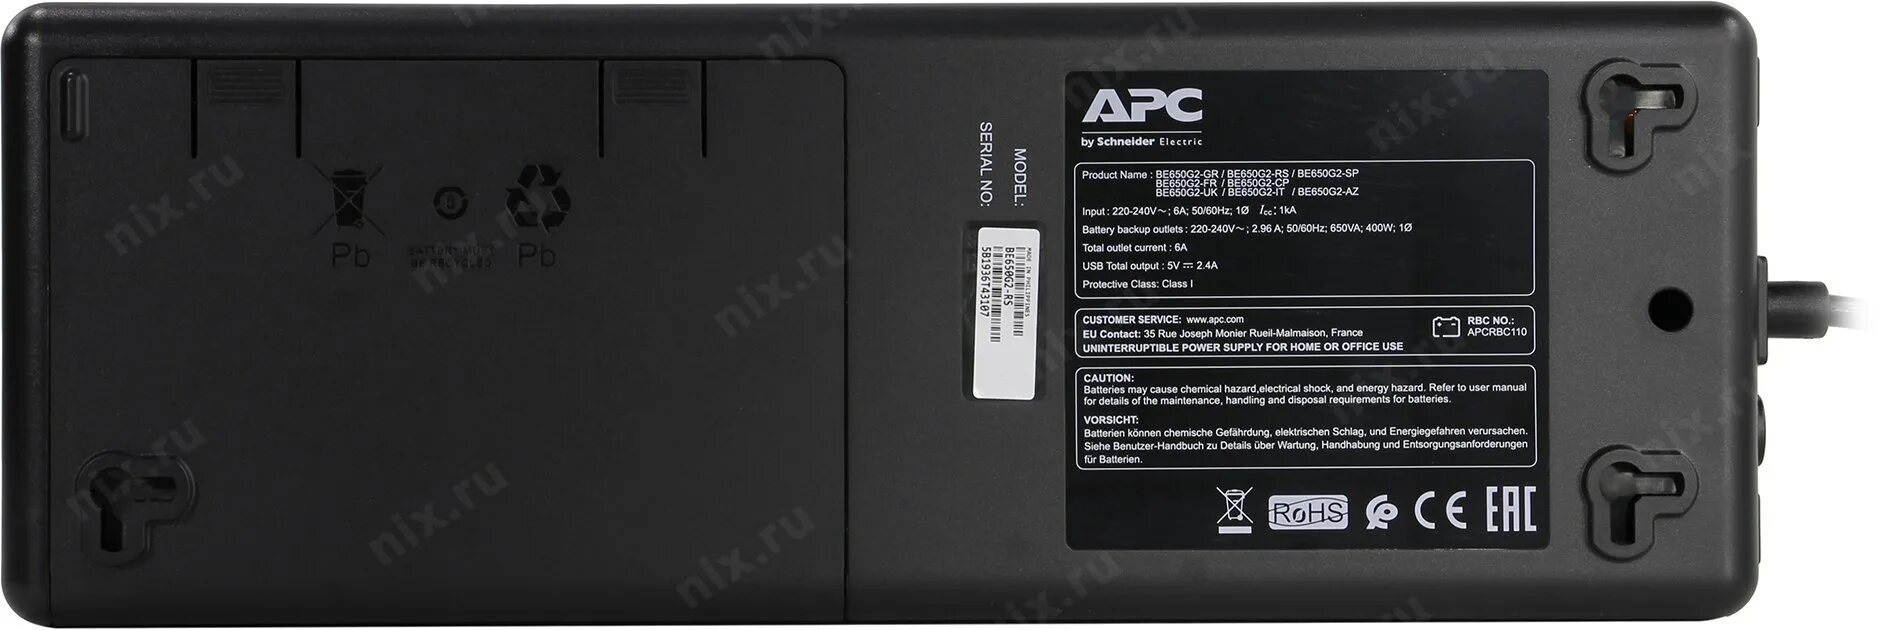 650 g2. ИБП APC back-ups be850g2-RS, 850вa. APC be650g2-RS. ИБП APC back-ups be650g2-RS. APC back-ups 850va be850g2-RS.